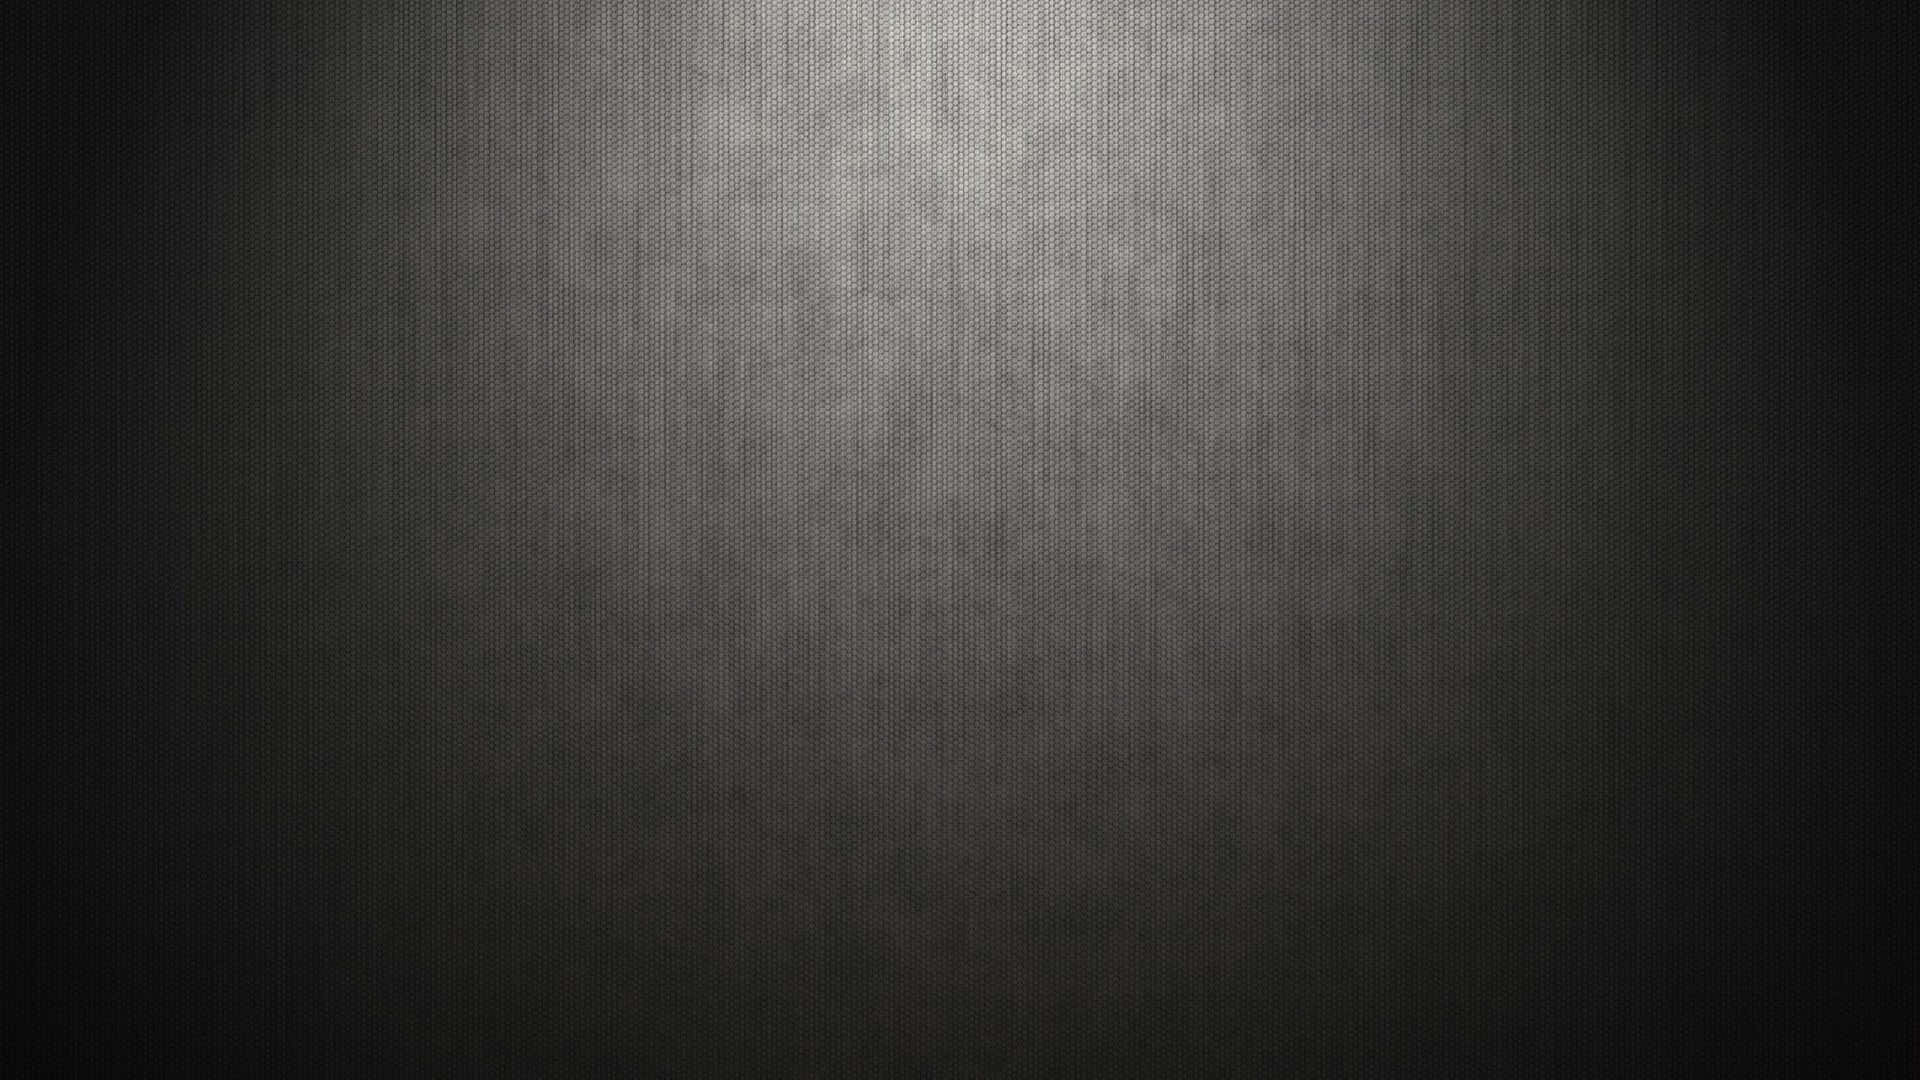 A Black Metal Background With A Light Shining On It